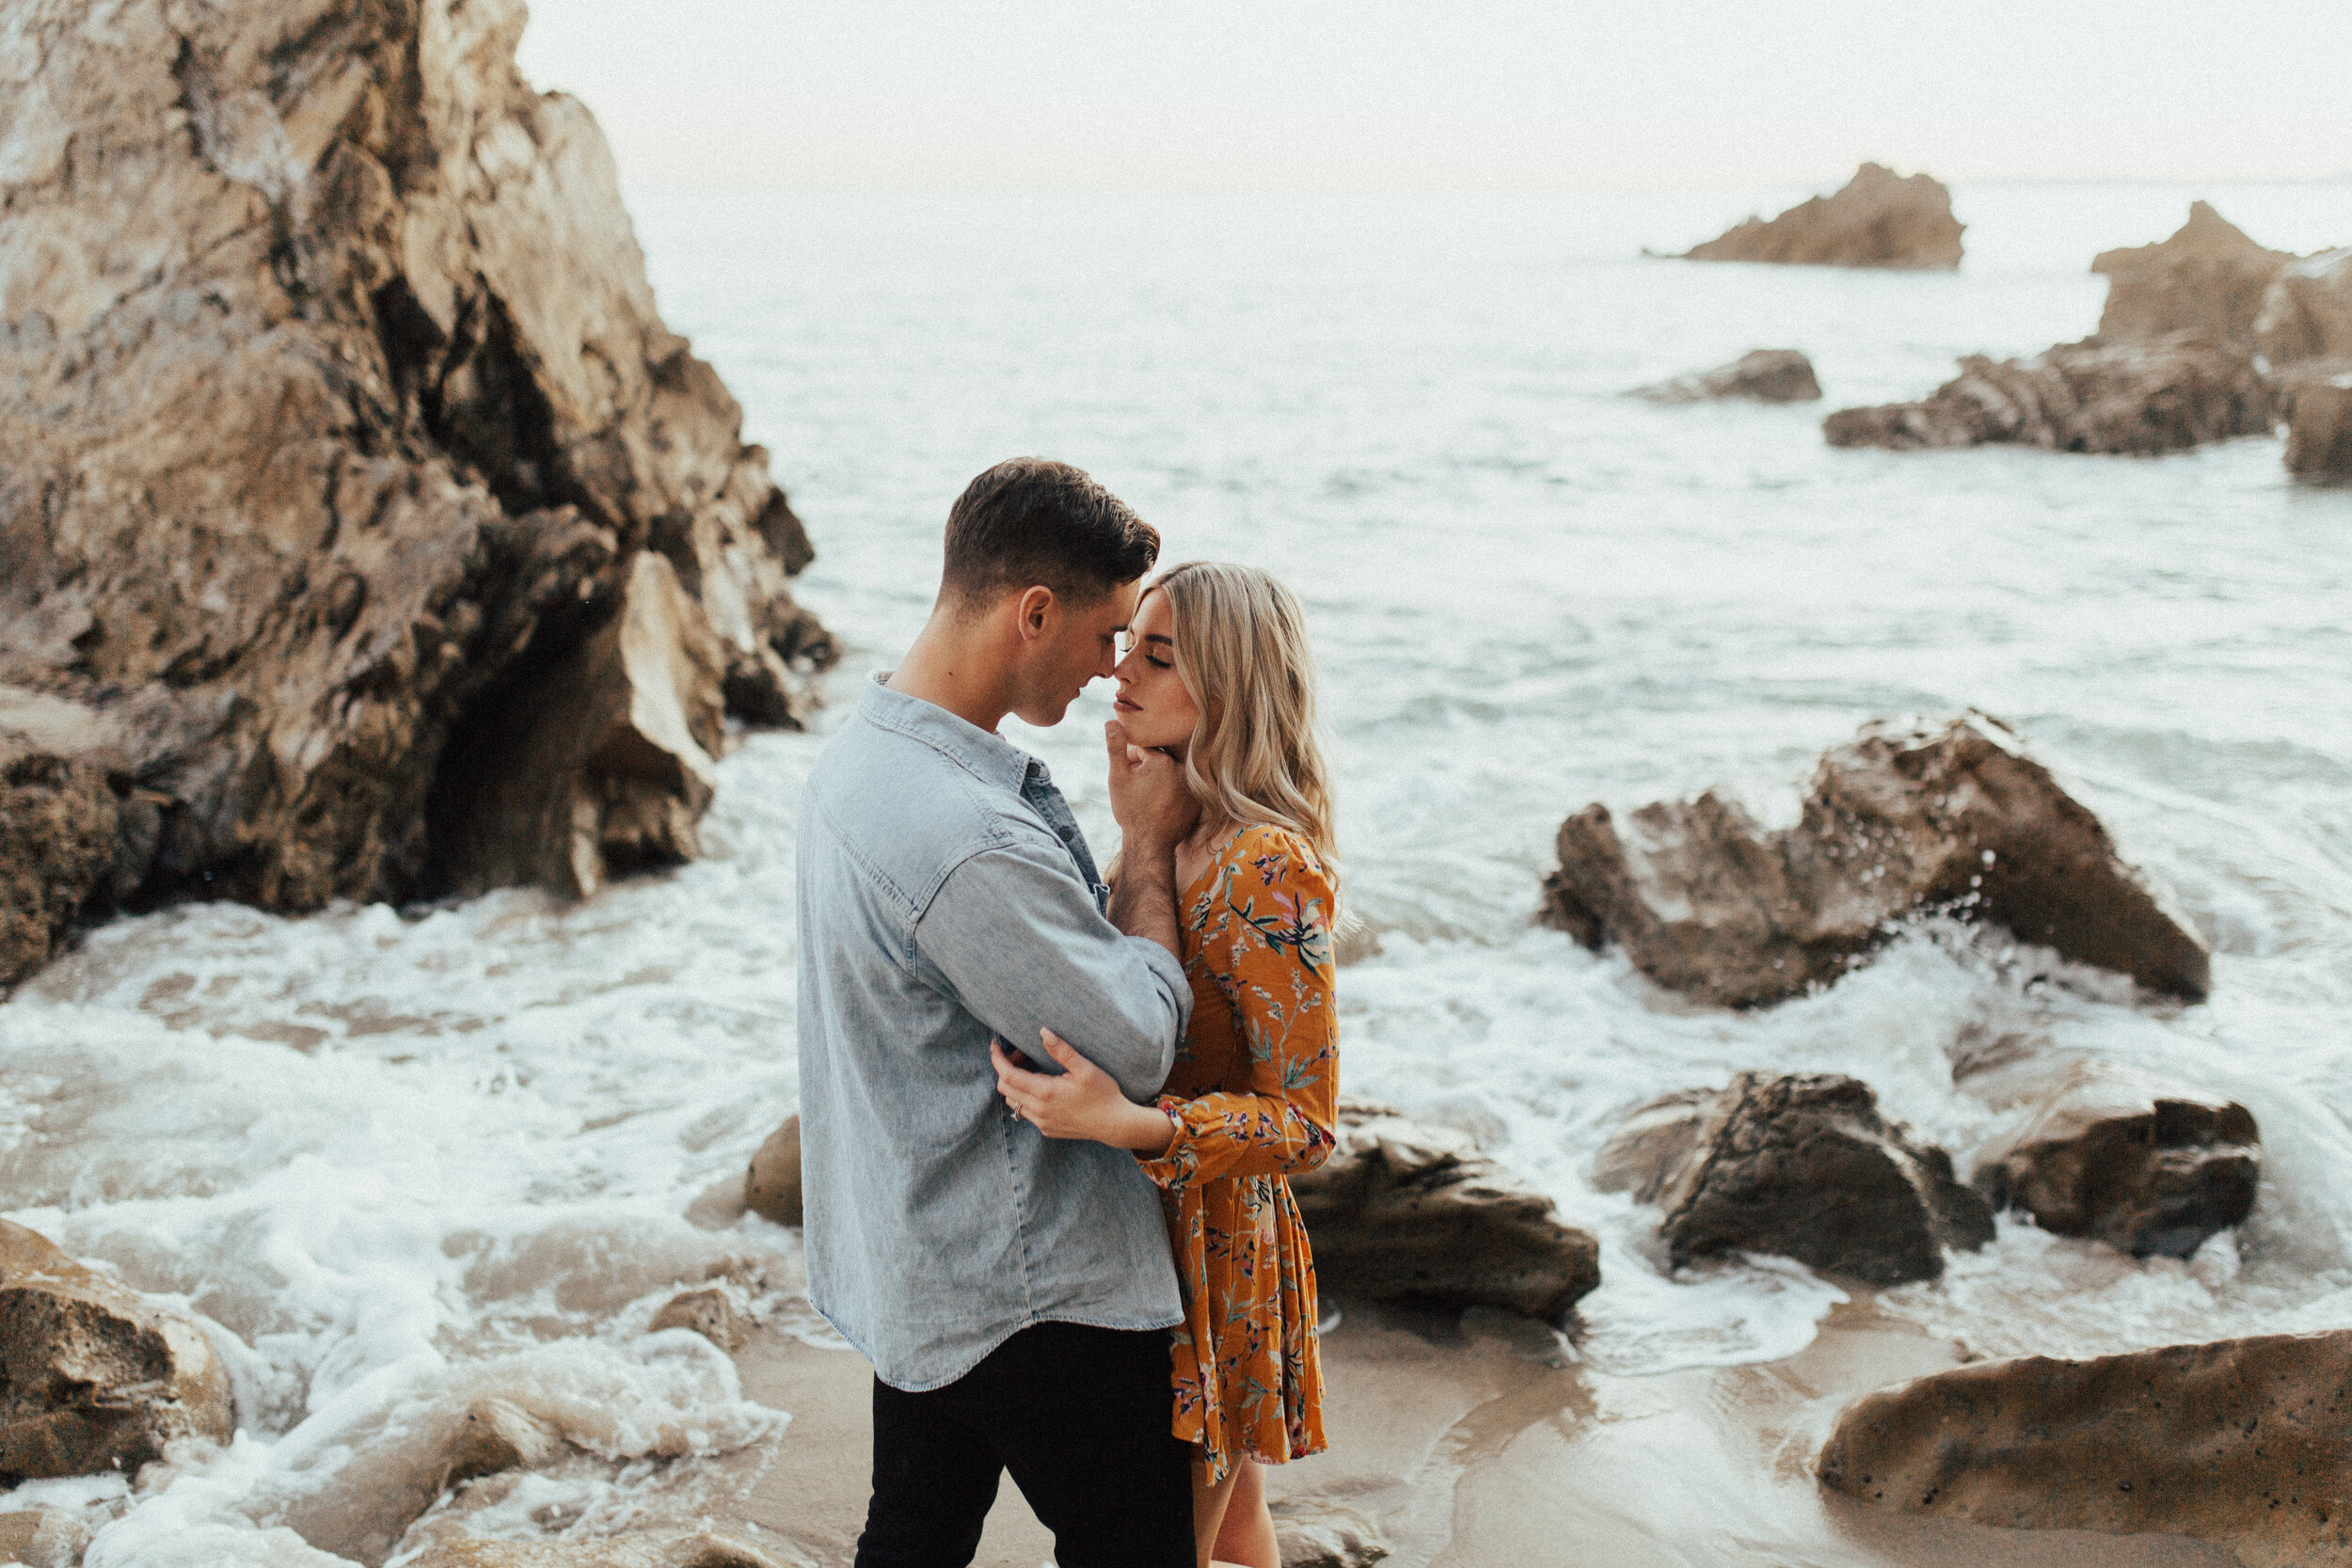 Top 10 poses for couples | Unscripted Photographers